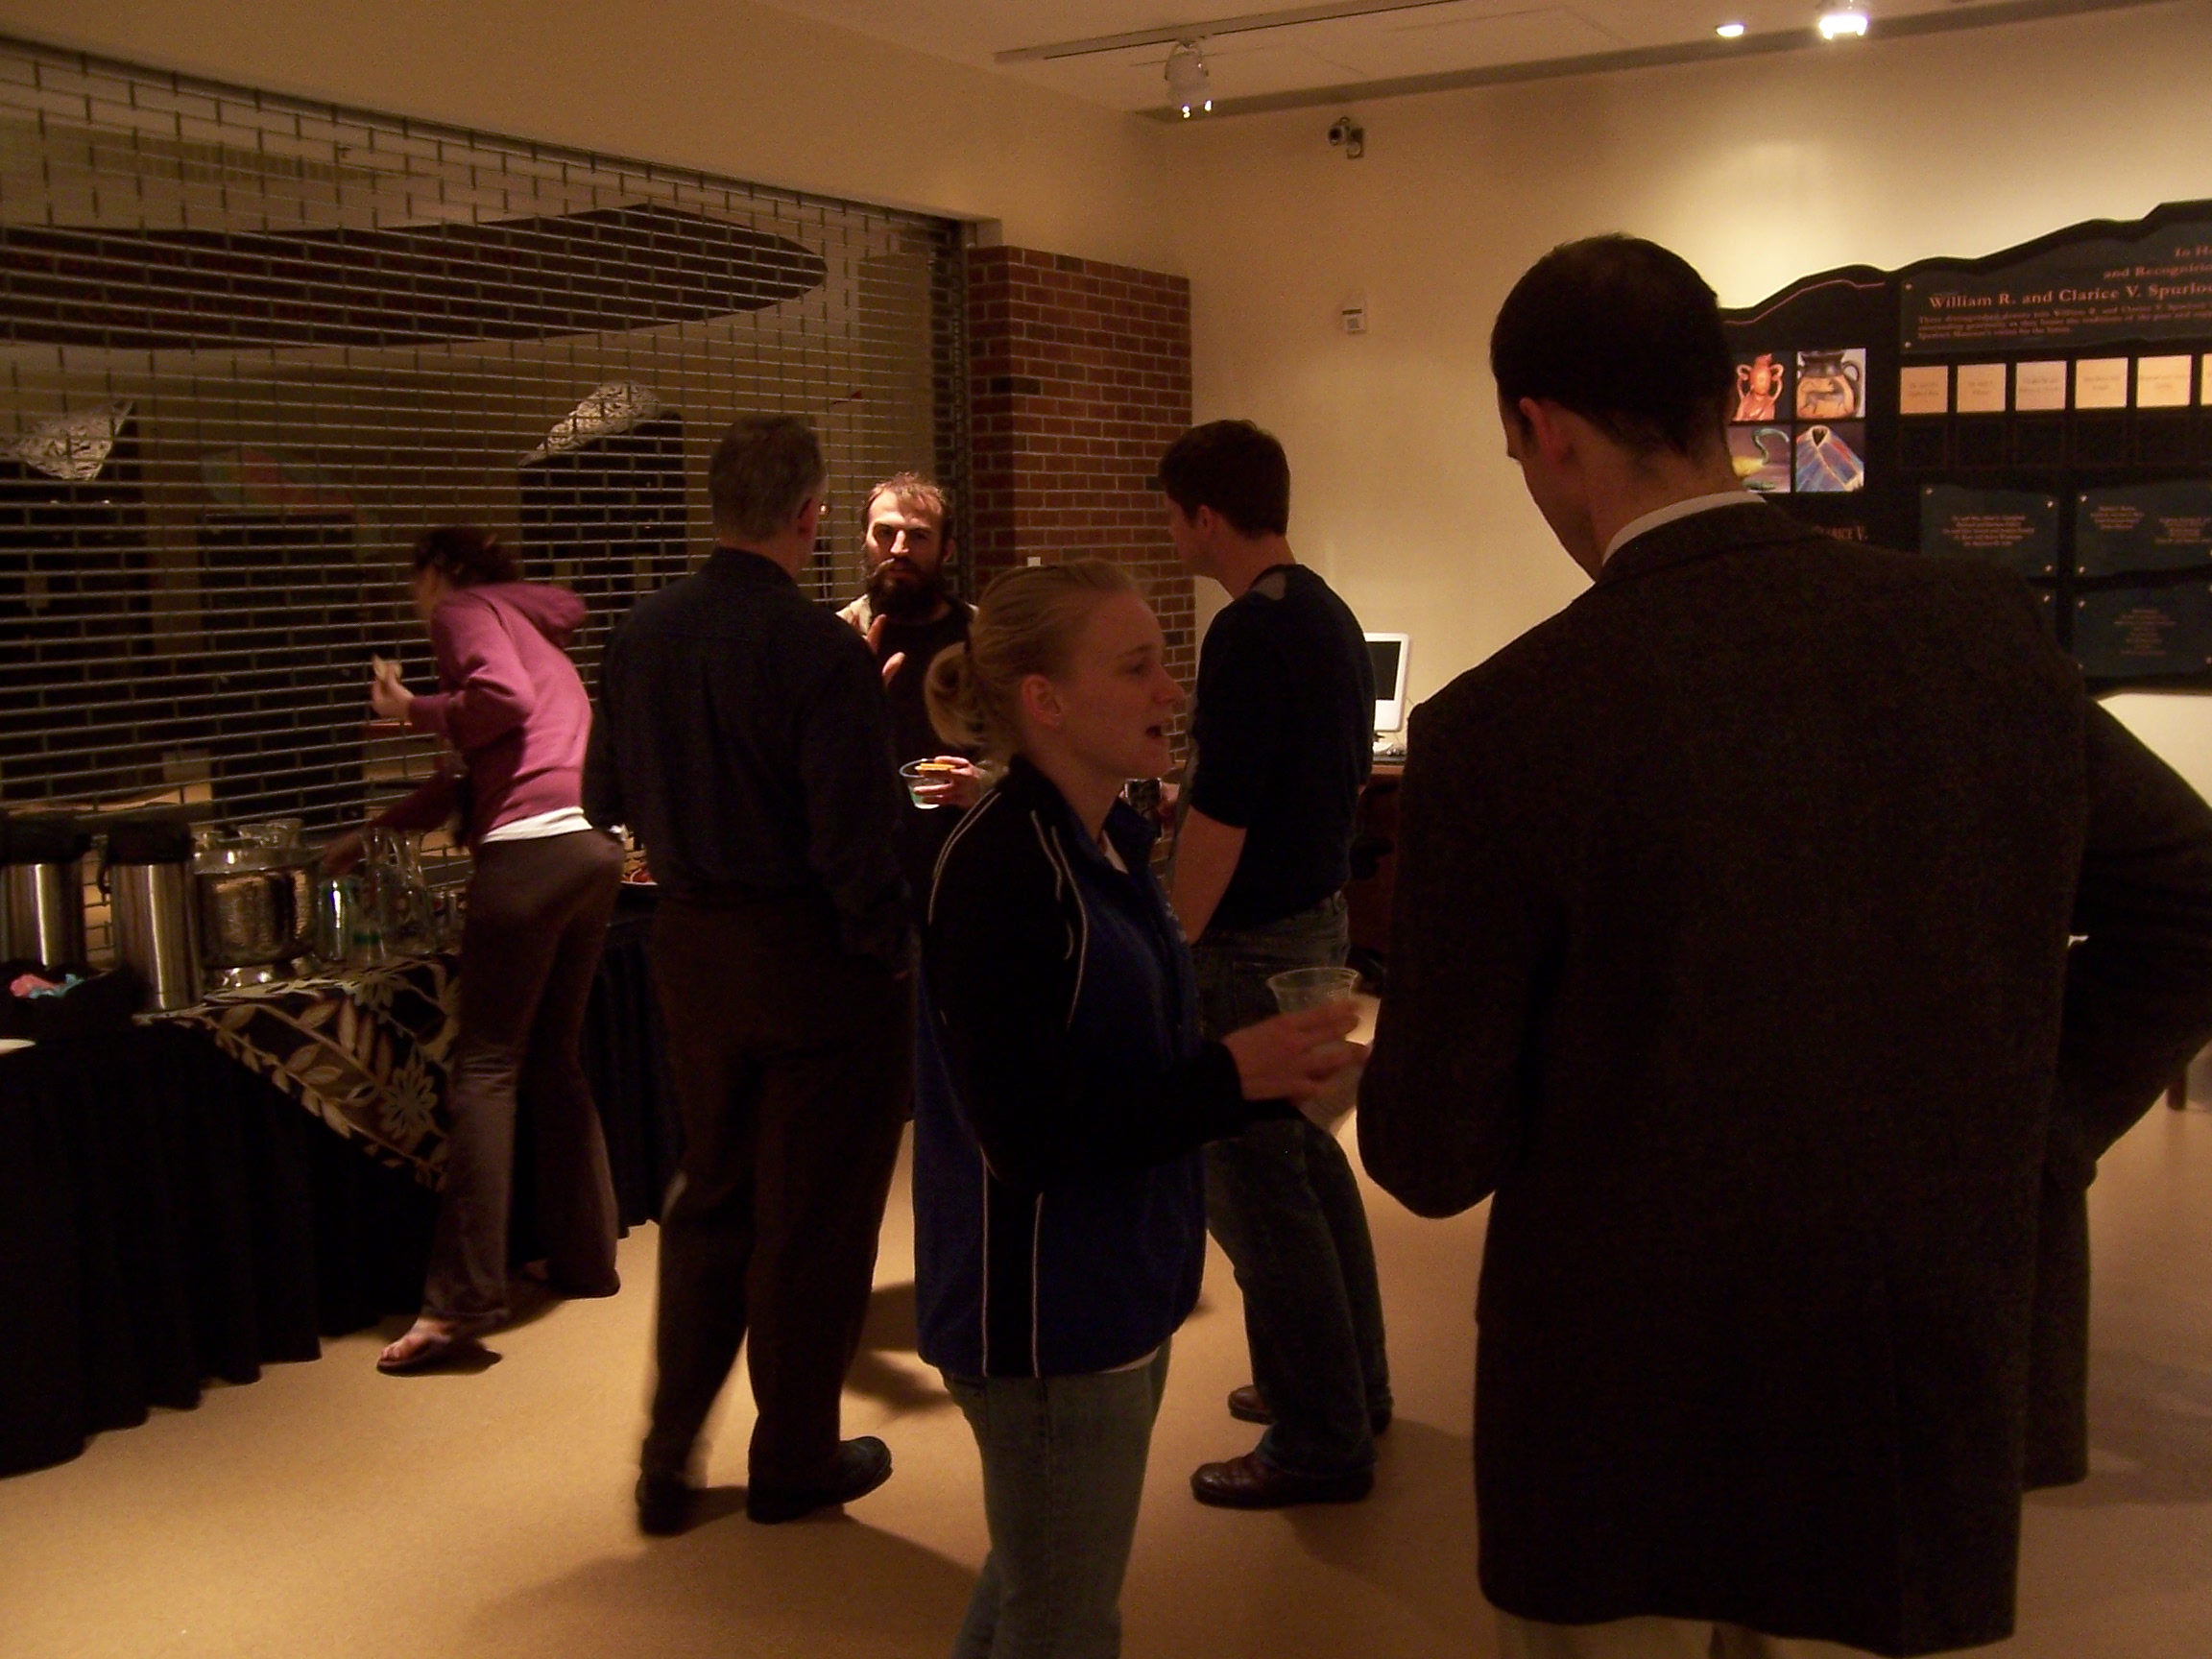 (4) Students and others at the reception, including (facing the camera) Craig Kreutzer and Maggie Dunleavy.